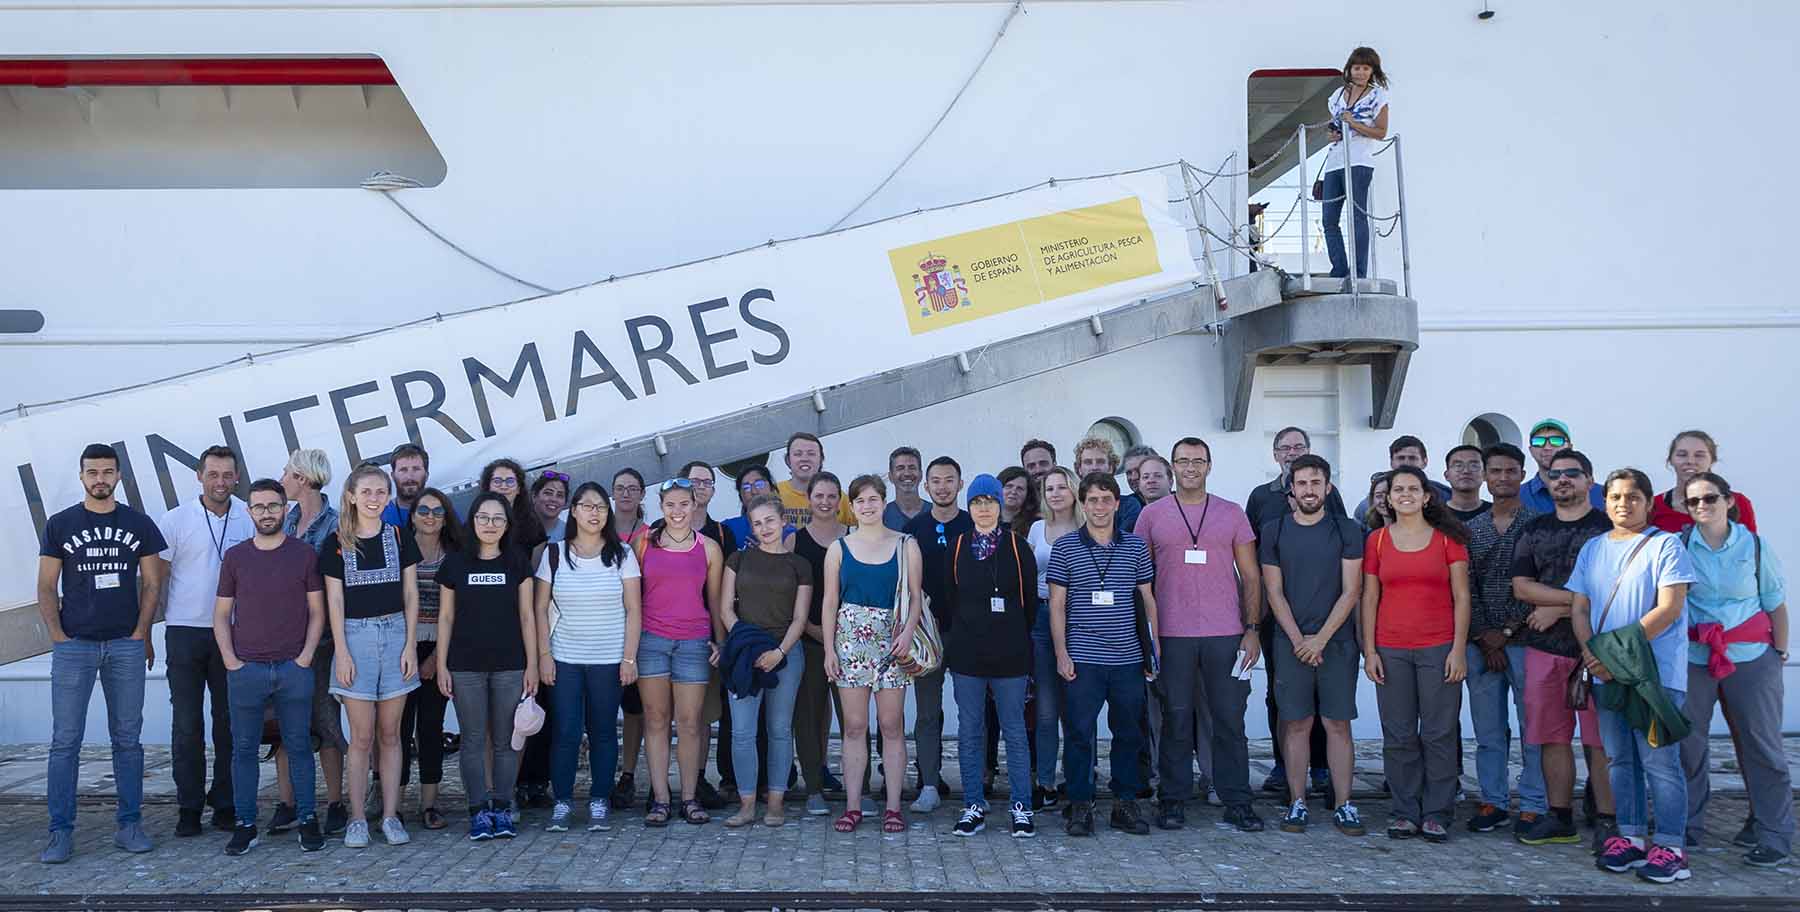 Group photo of the 2019 GEOTRACES International Summer School class. (Photo courtesy of Campus del mar.)